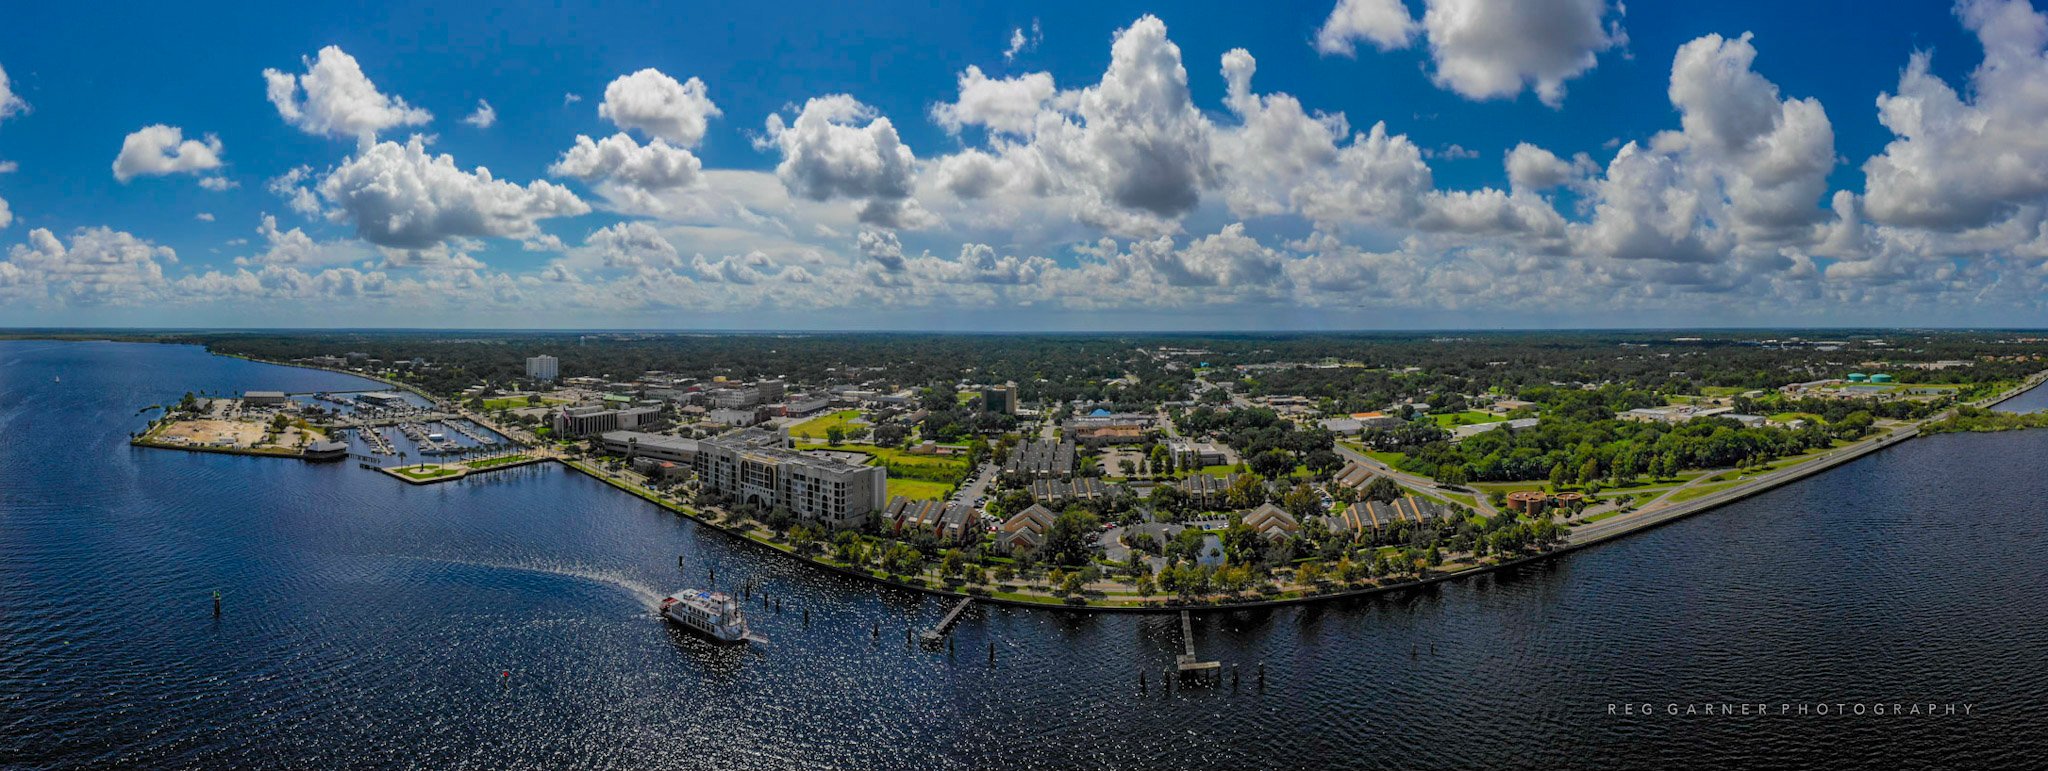 Wide view of Barbara-Lee Ship on St. Johns River